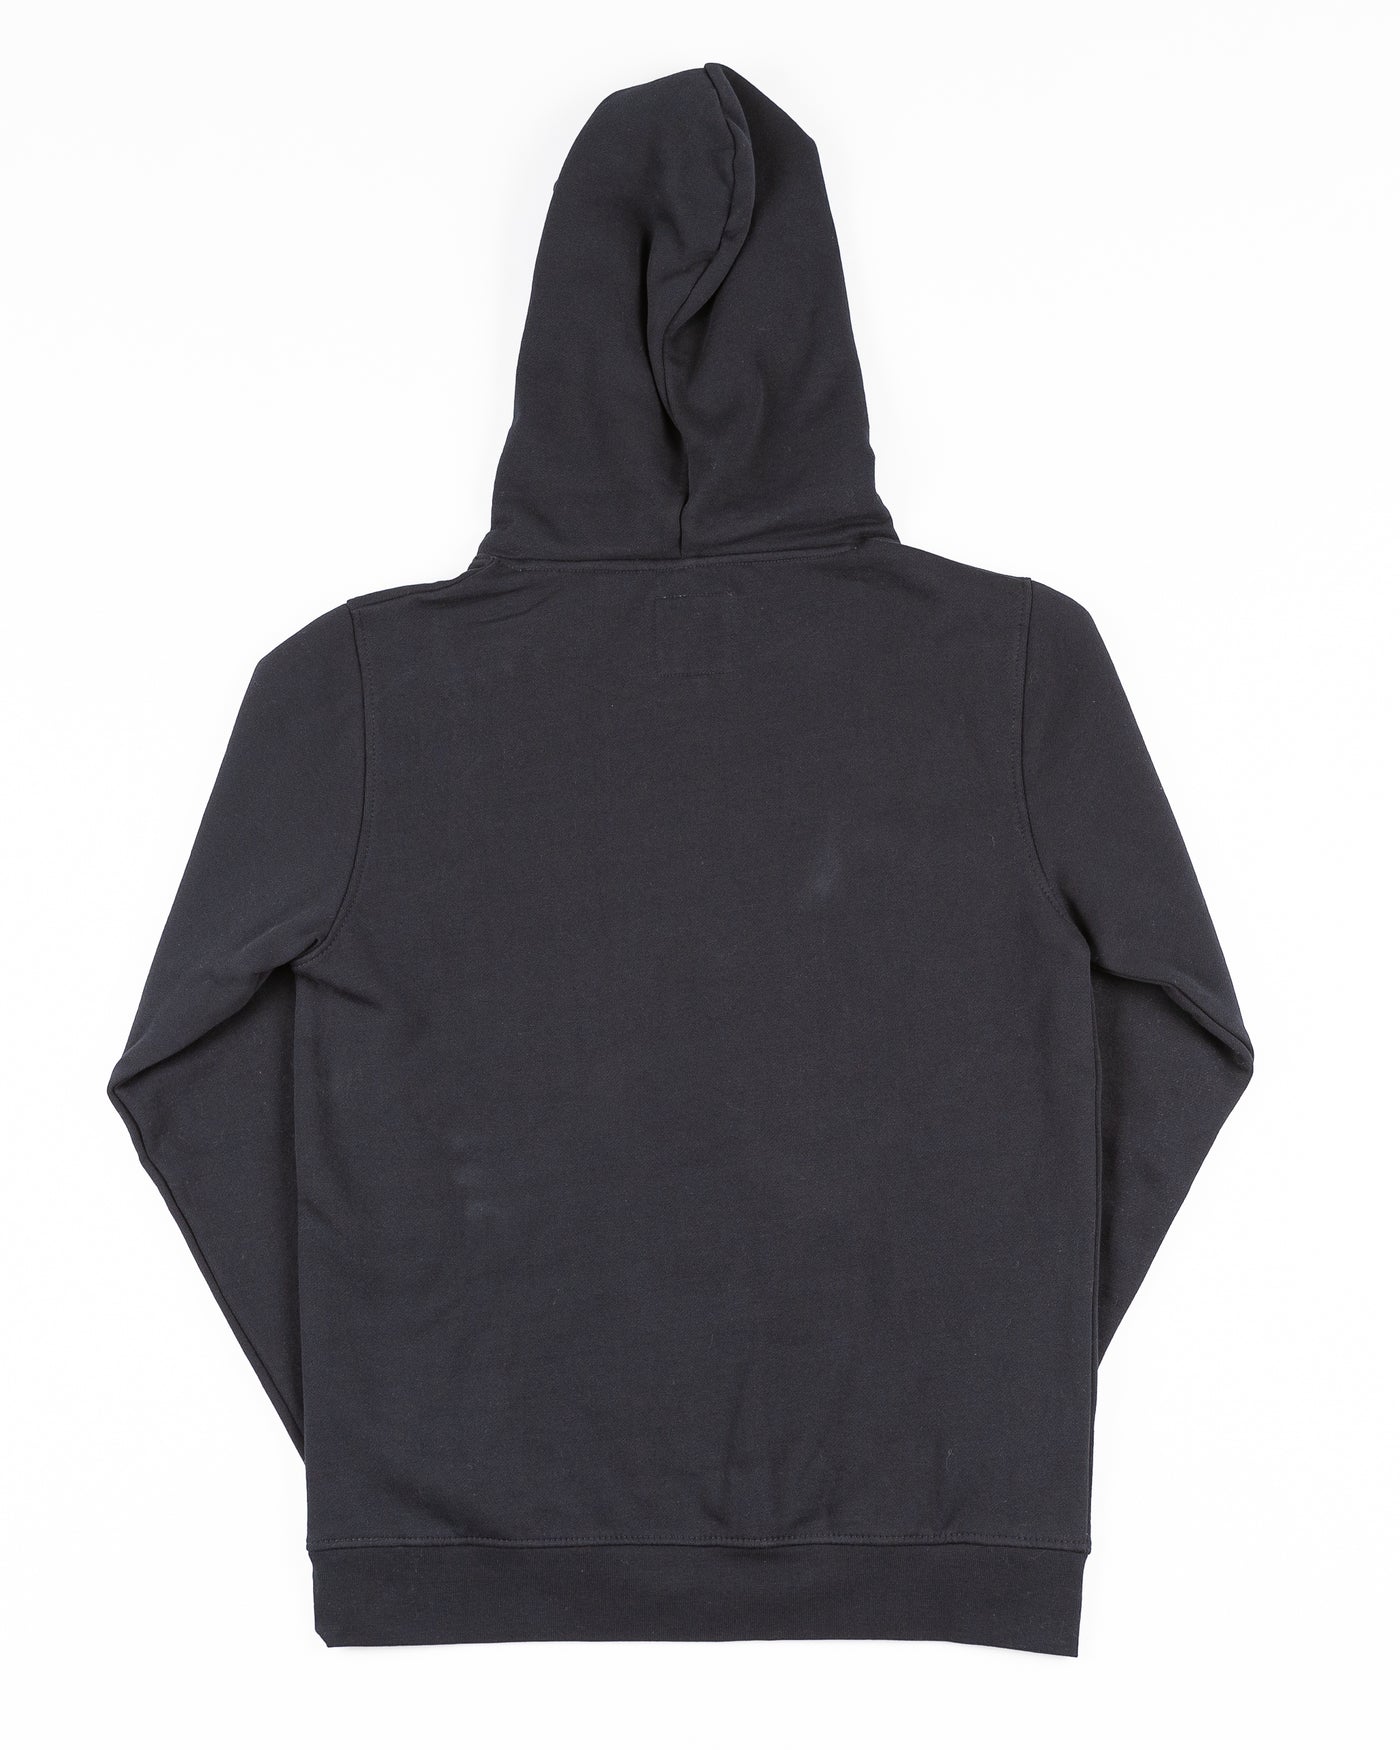 black hoodie with Chicago wordmark and Chicago Blackhawks four feathers logo embroidered across the front - back lay flat